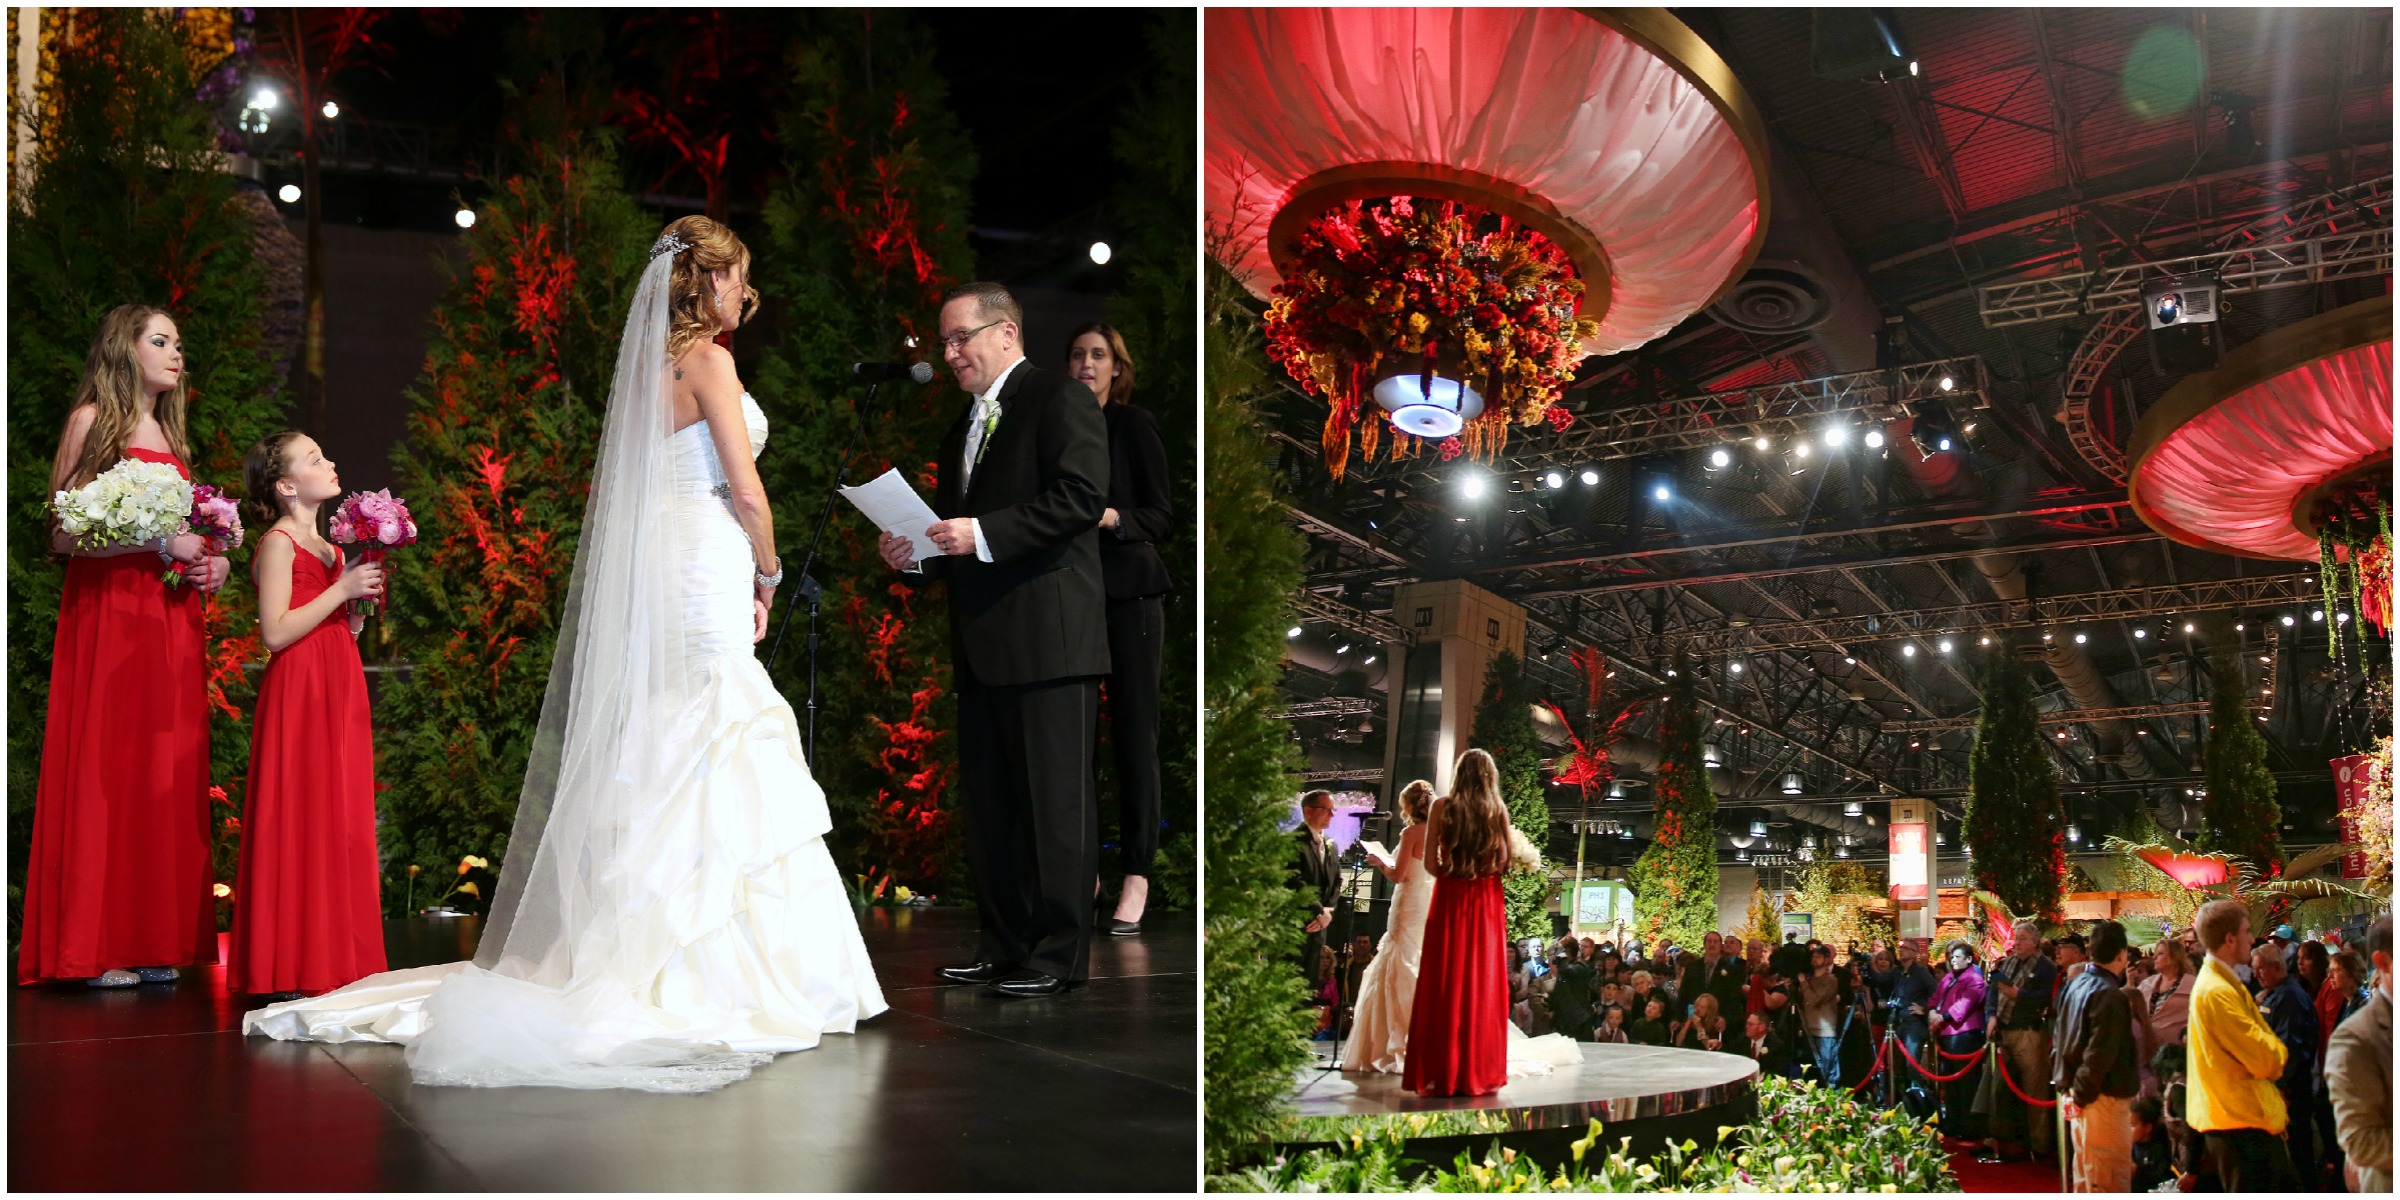 The Bride & Groom Tie The KNot In Front of a Crowd of  Flower Show Guests, Exhibitors & Family